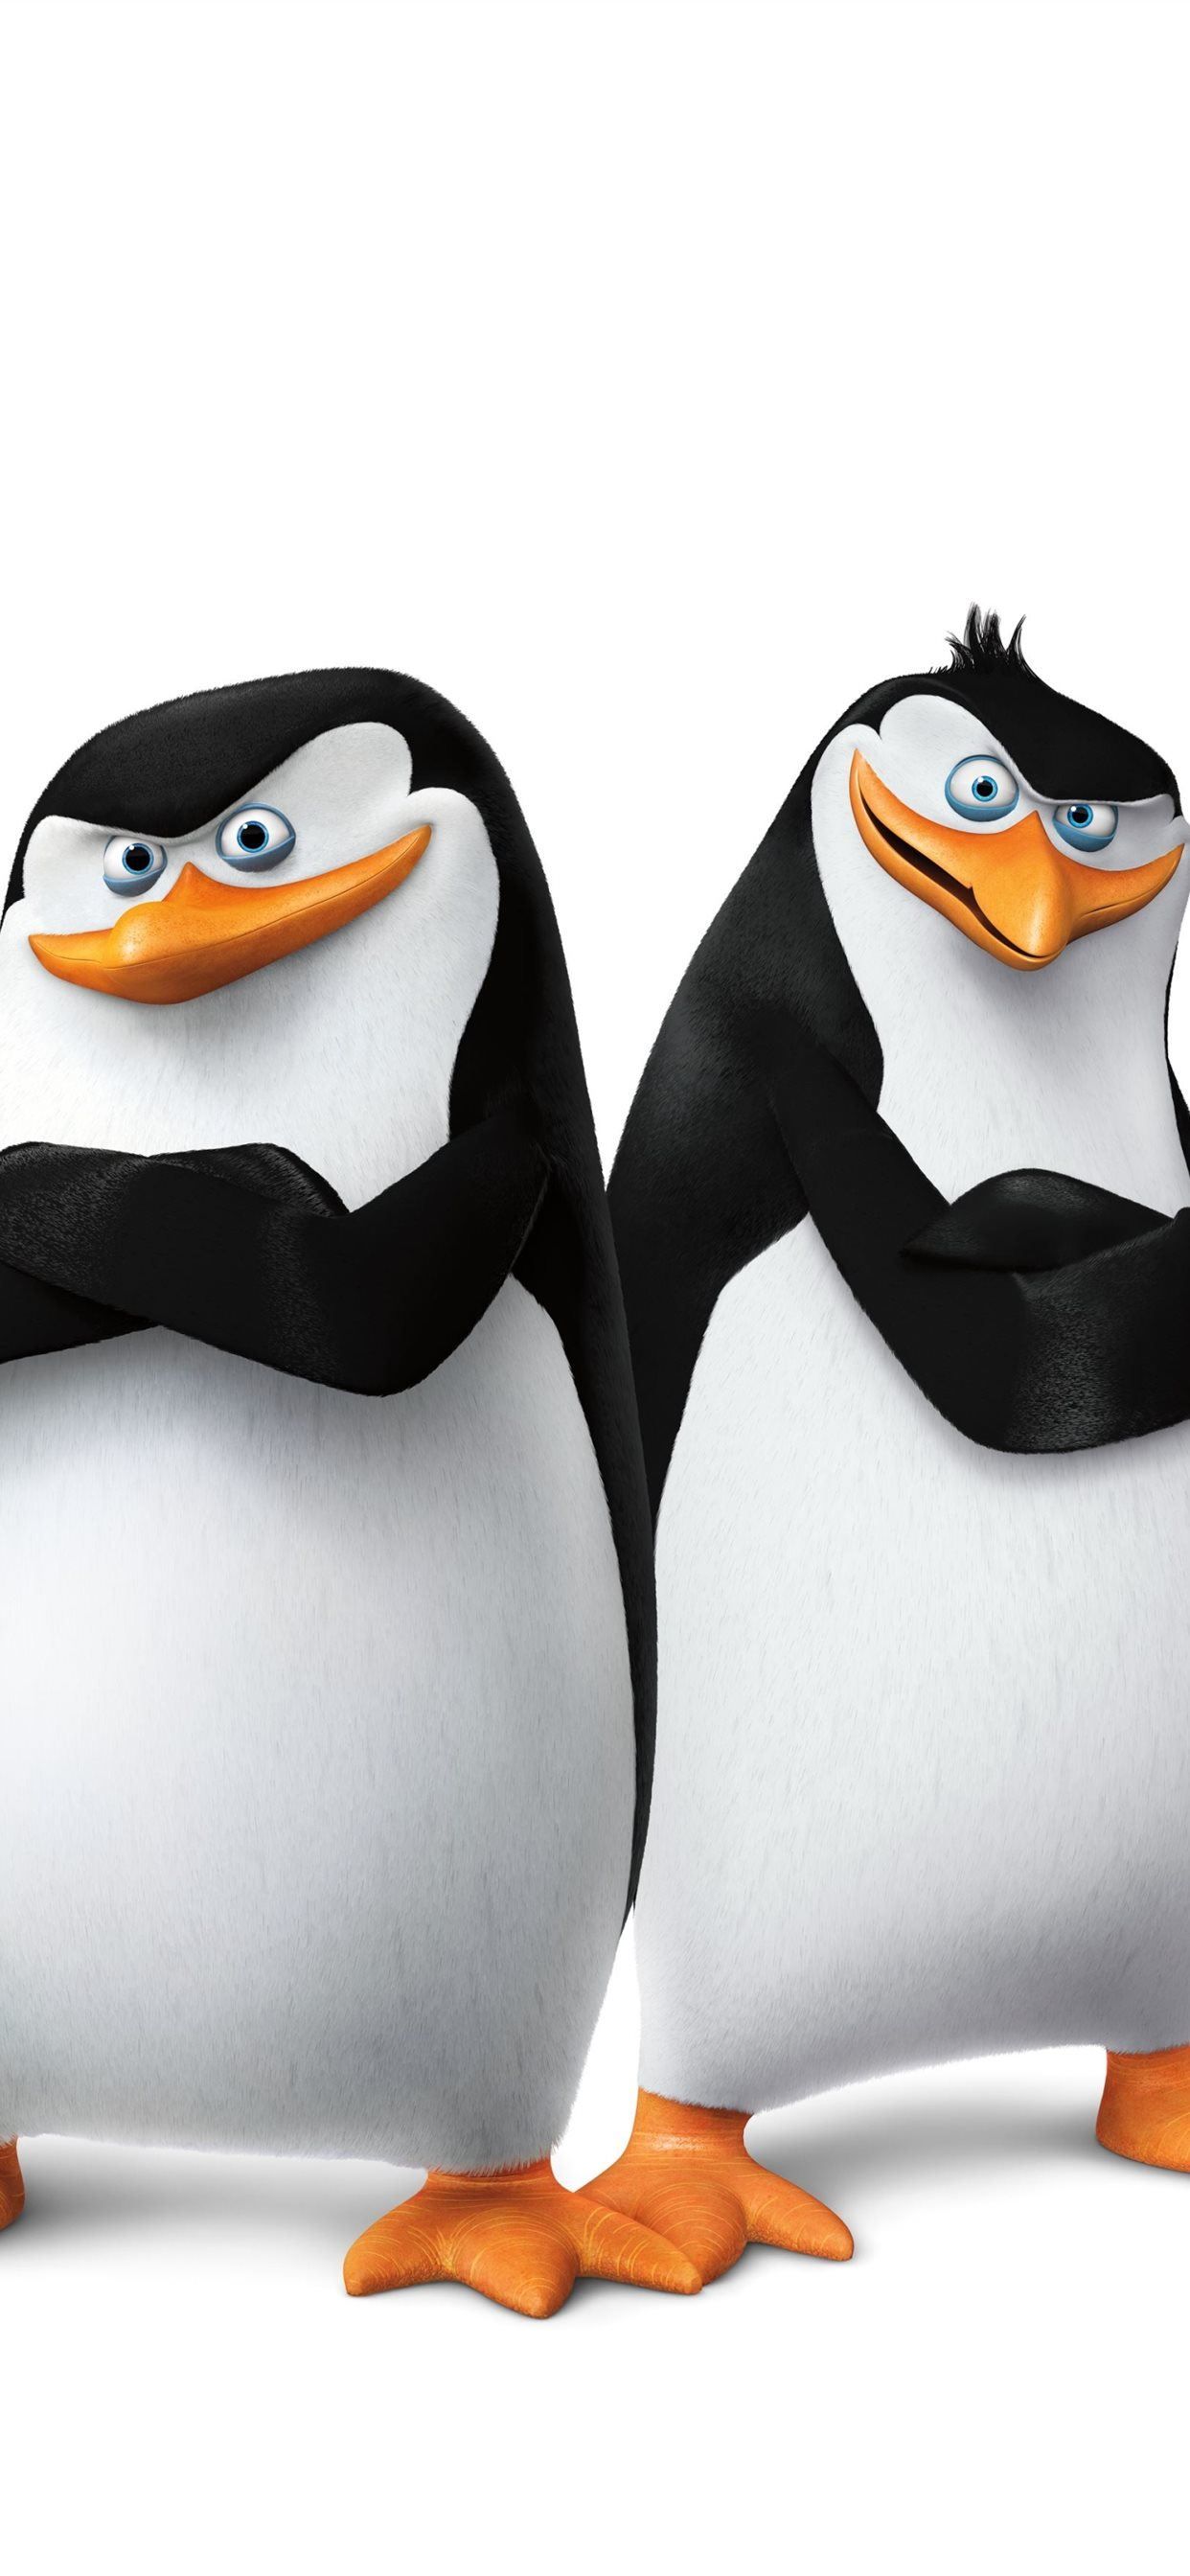 Movie Penguins Of Madagascar ID 831106 iPhone X Wallpaper Free Download